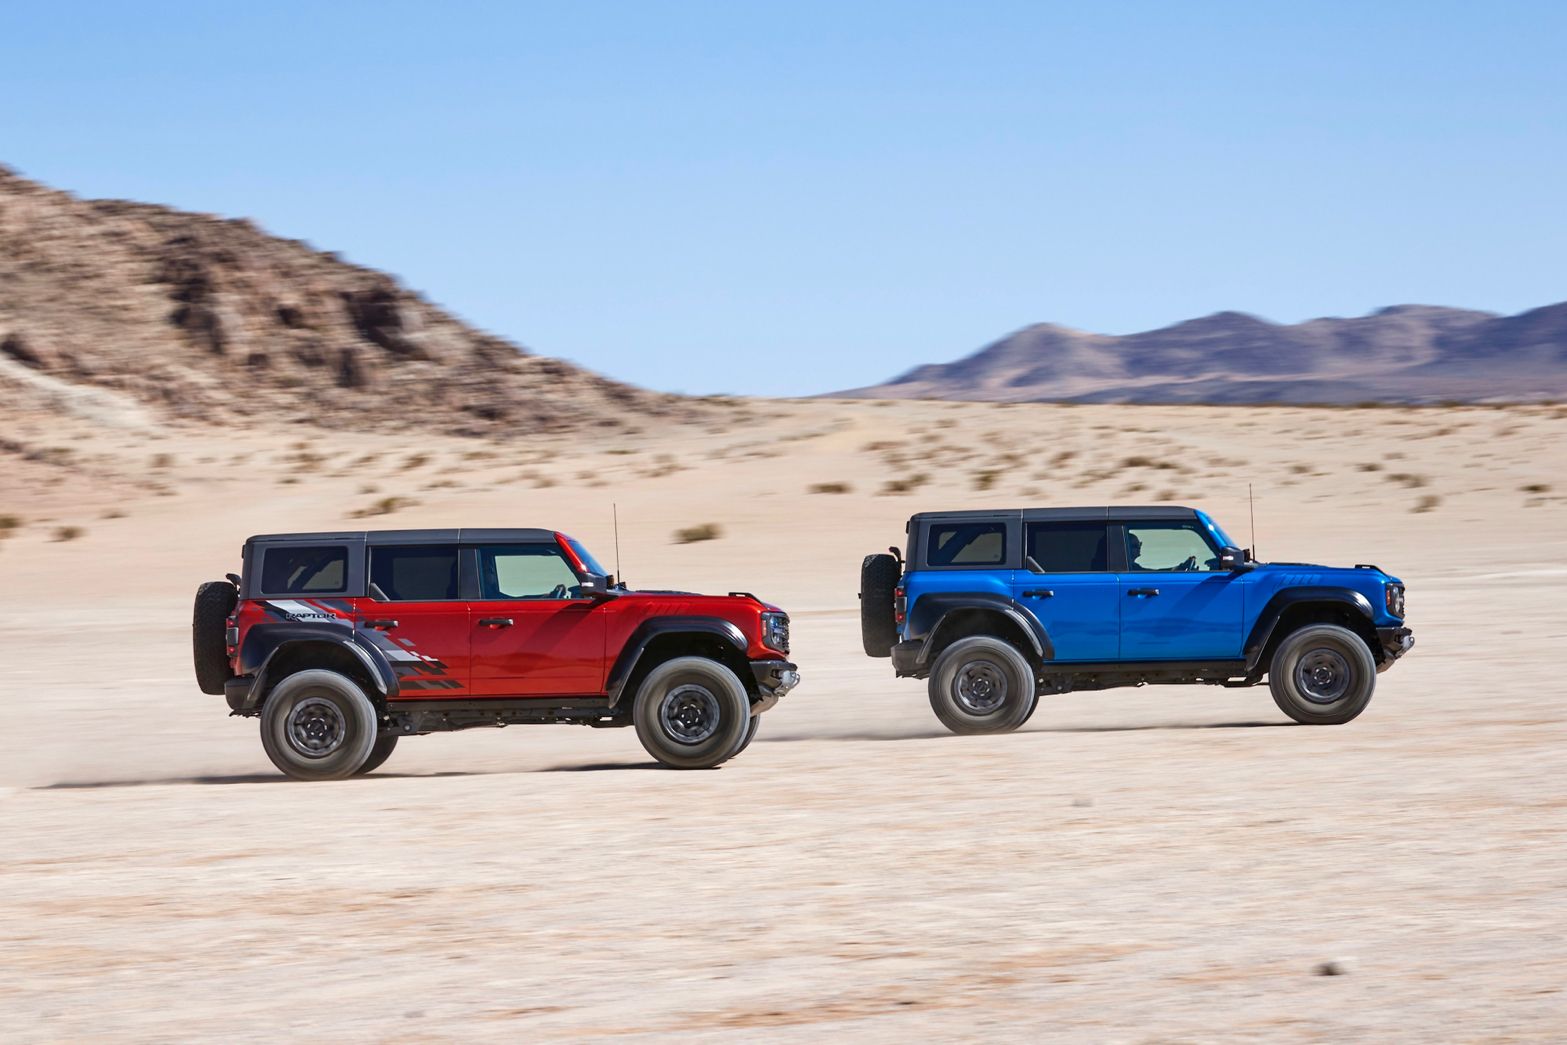 Capable of highway-speed desert-dune conquering and Baja rock-crawling